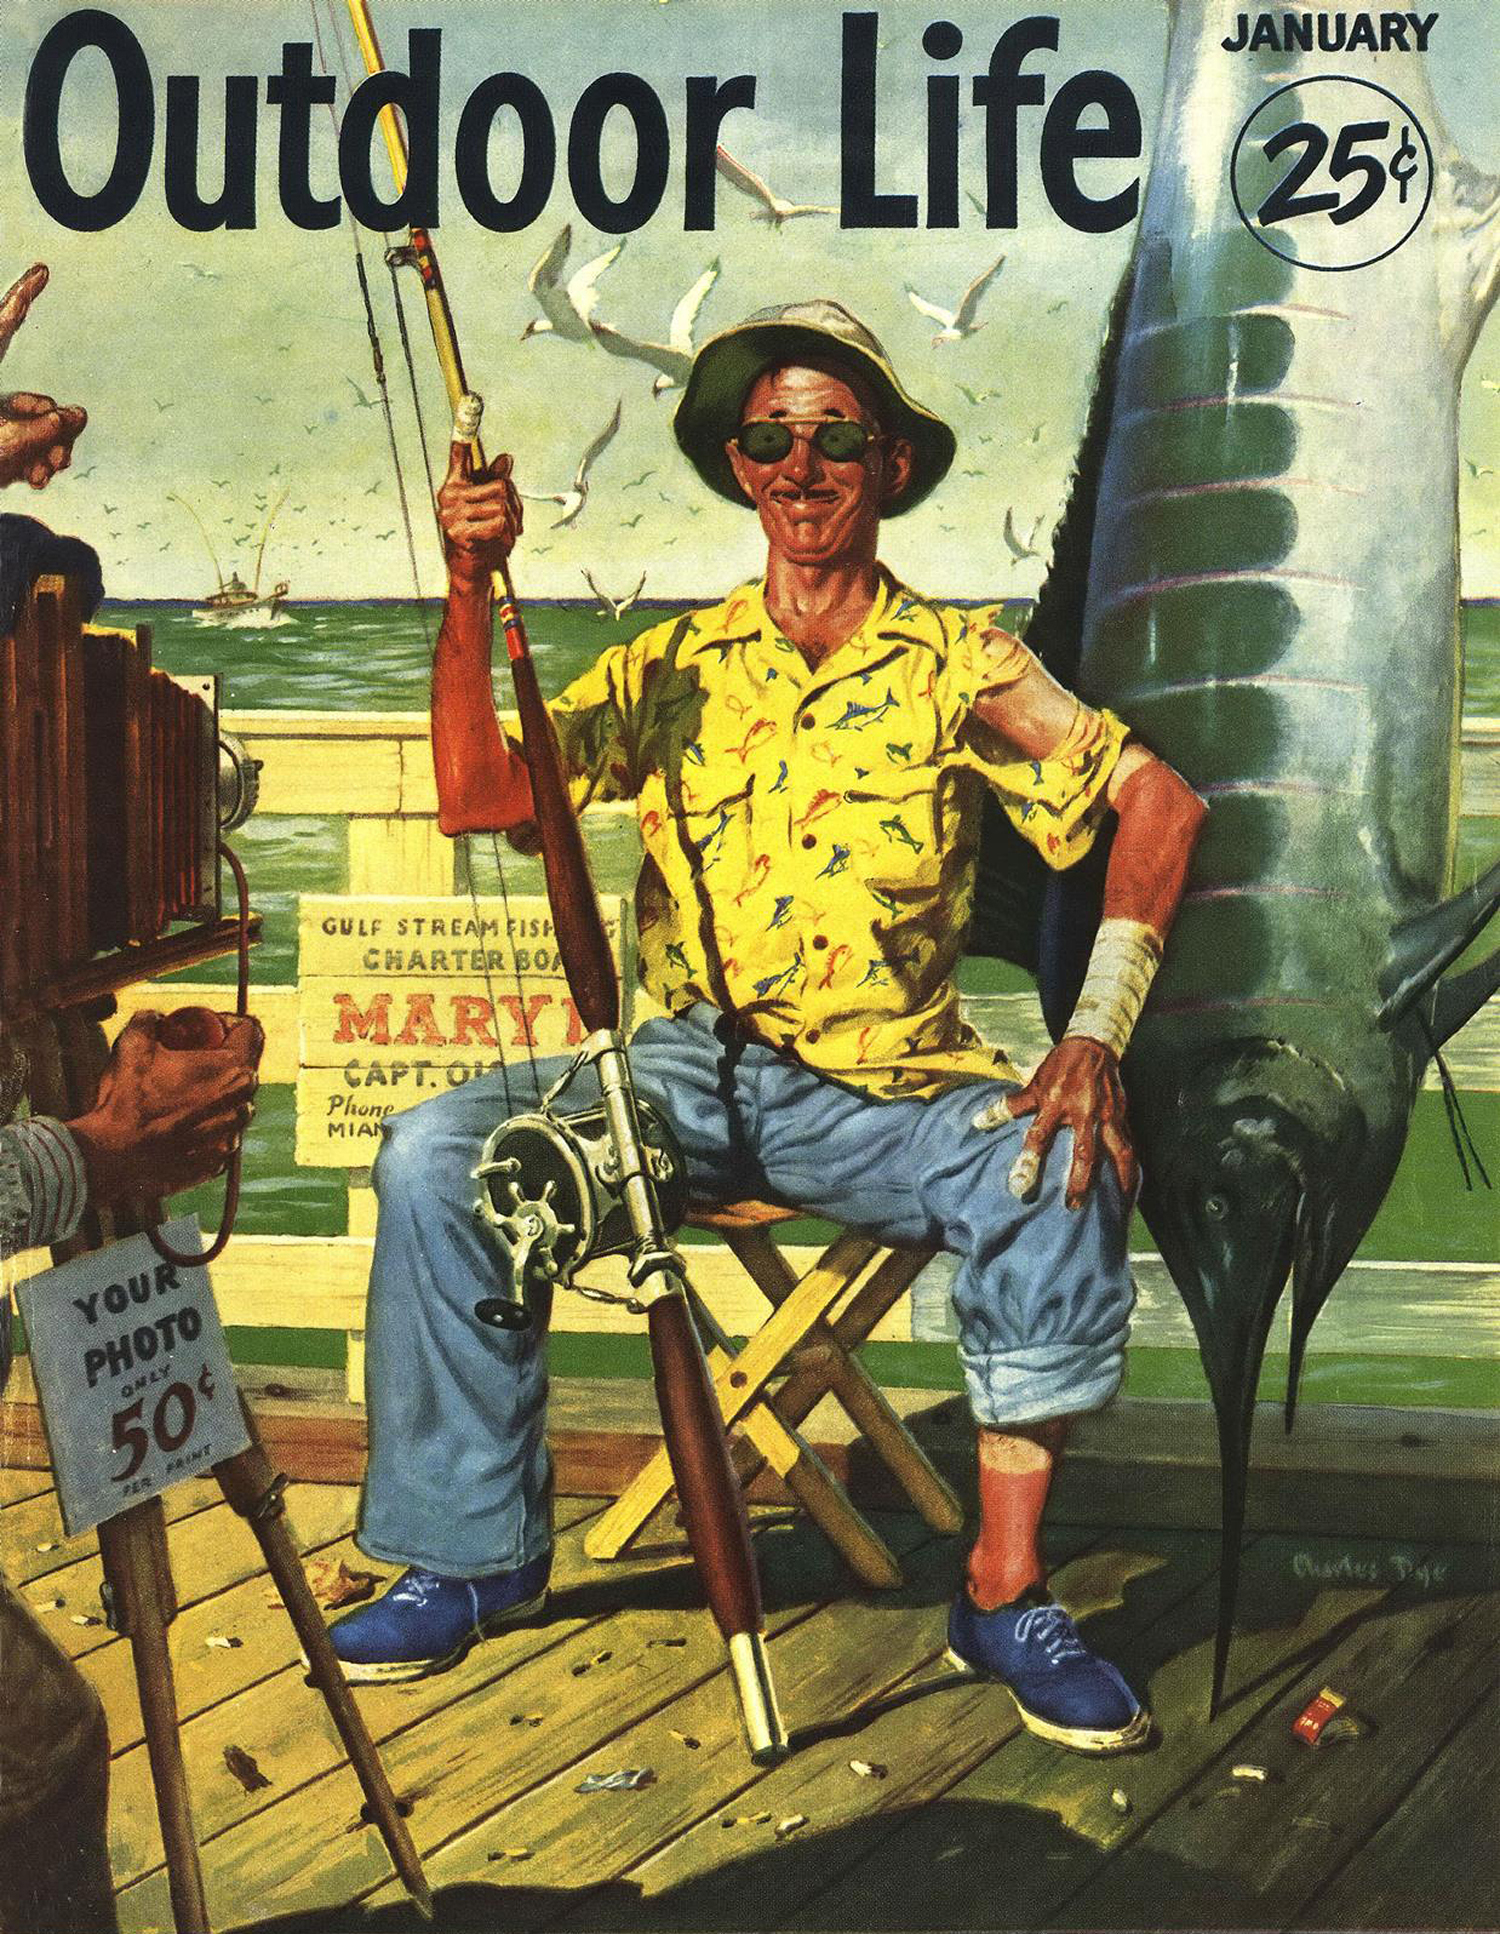 January 1953: Offshore fishing stories were a staple of the 1950s.